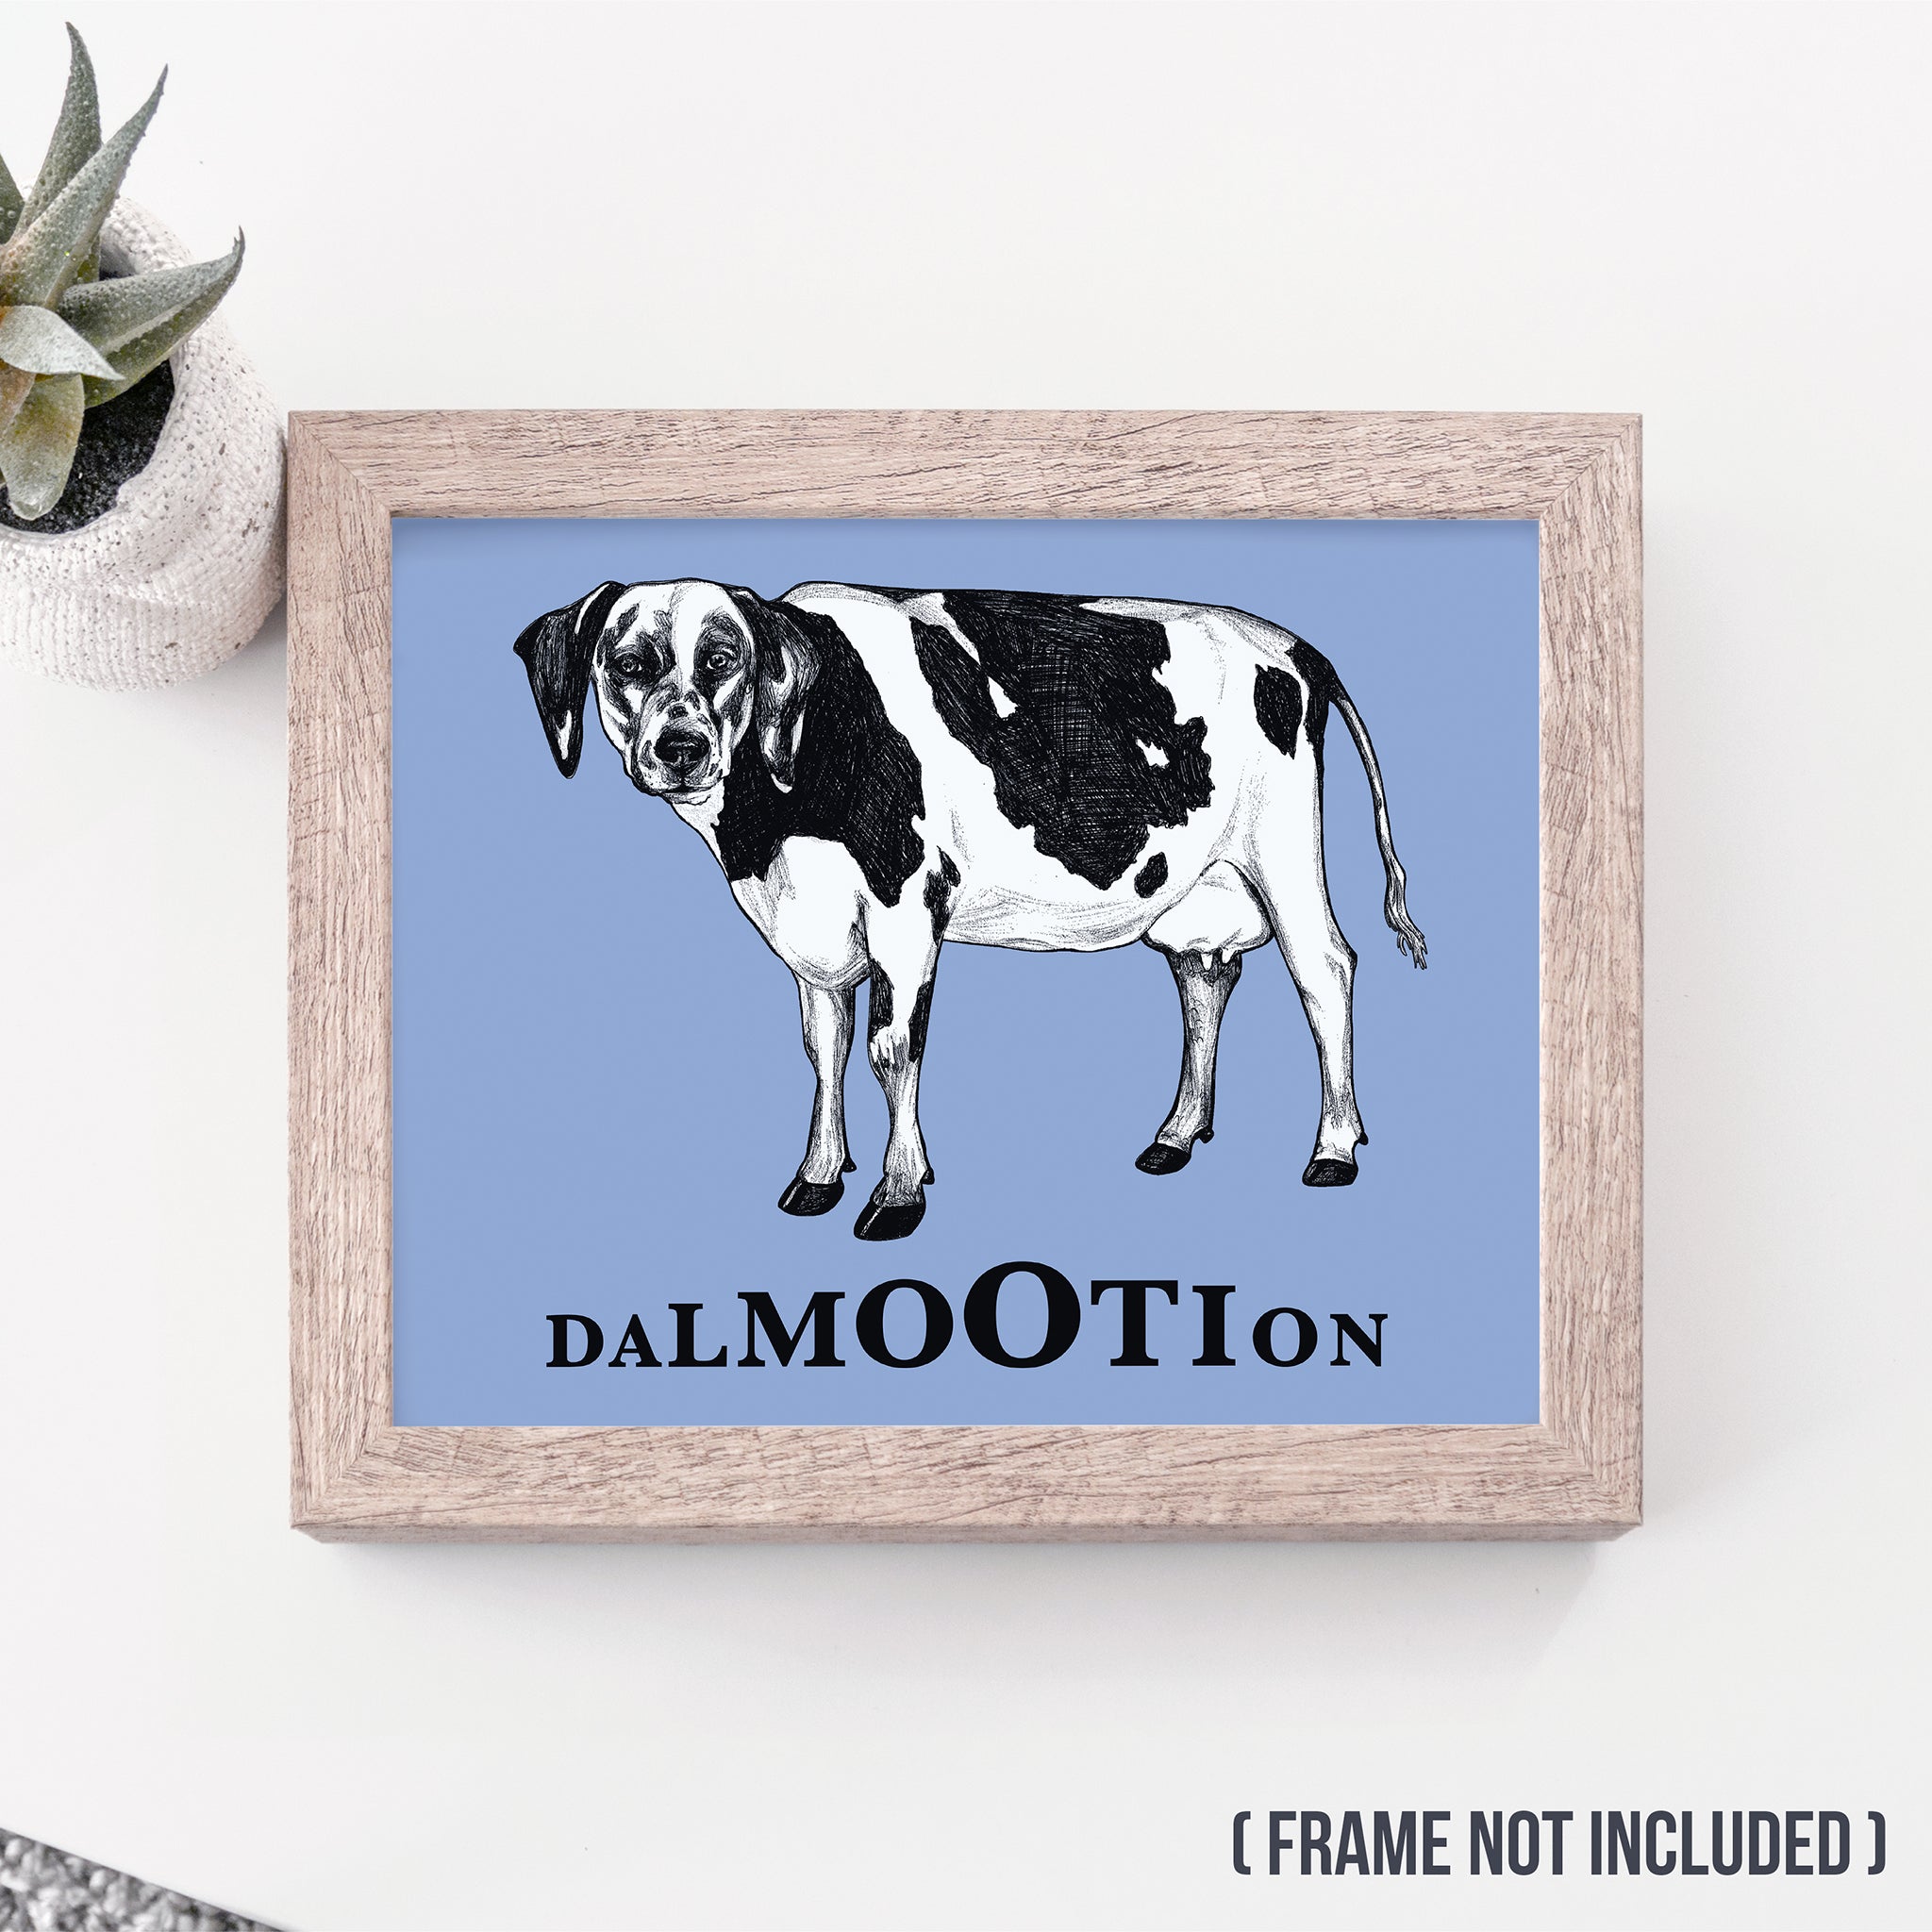 Dalmootion 8x10" Color Print